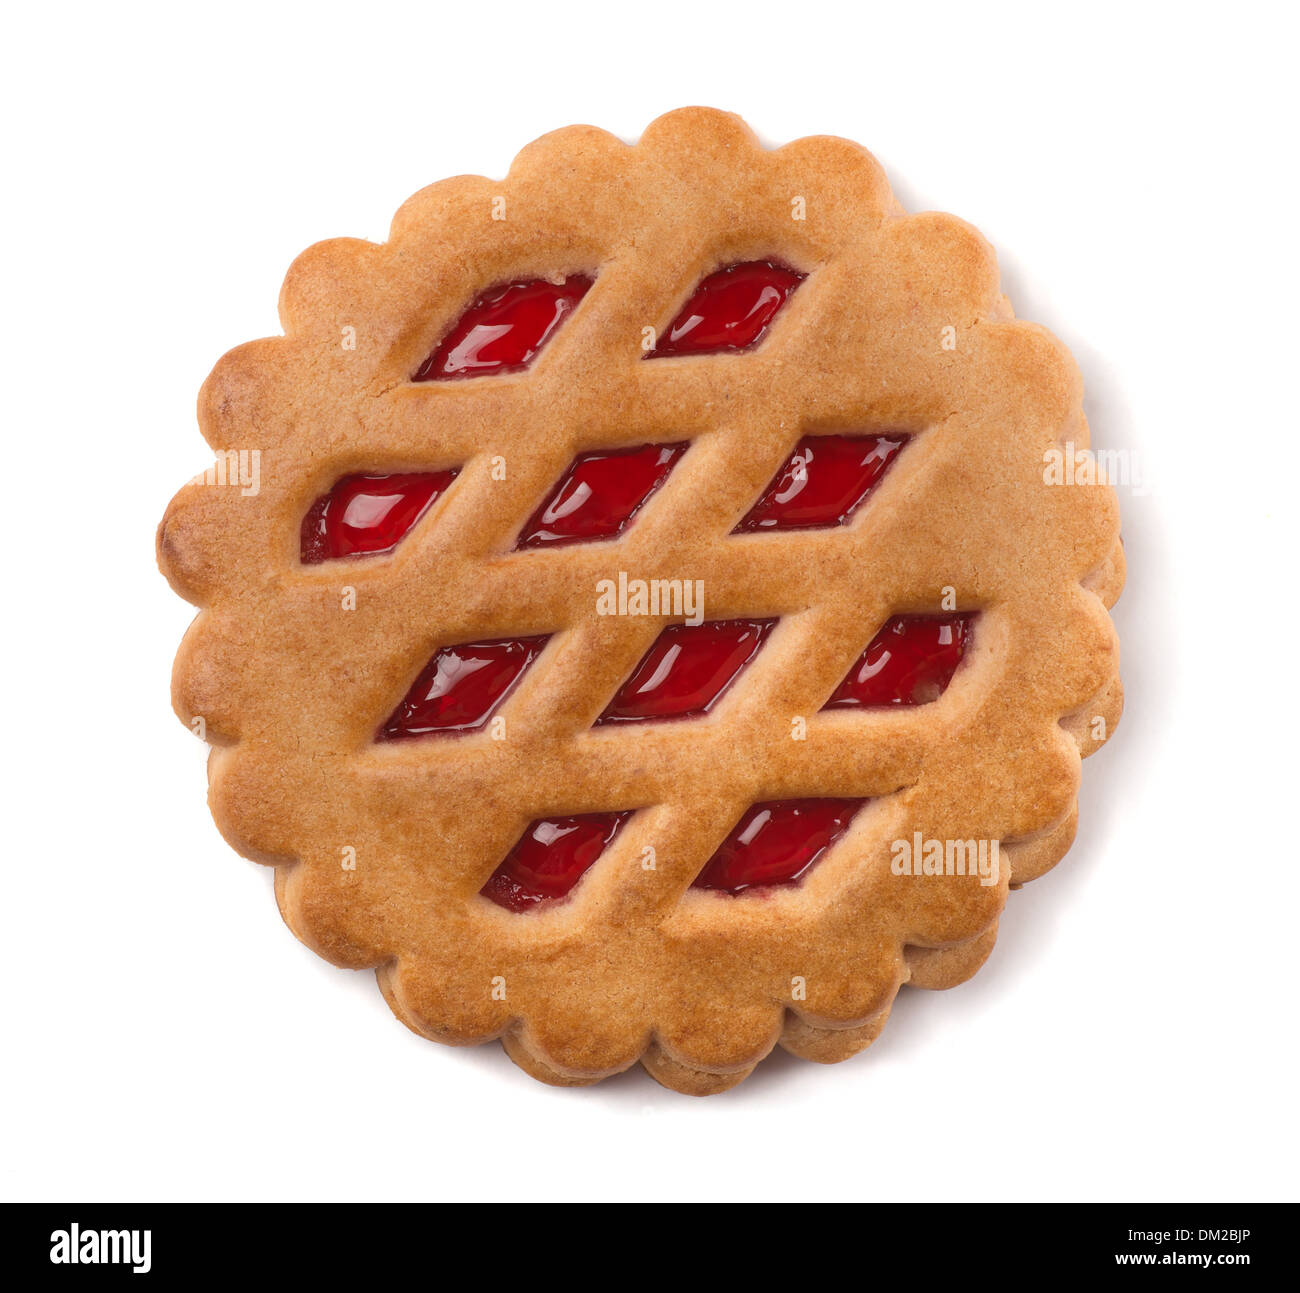 Single cookie with fruit jam filling isolated on white Stock Photo